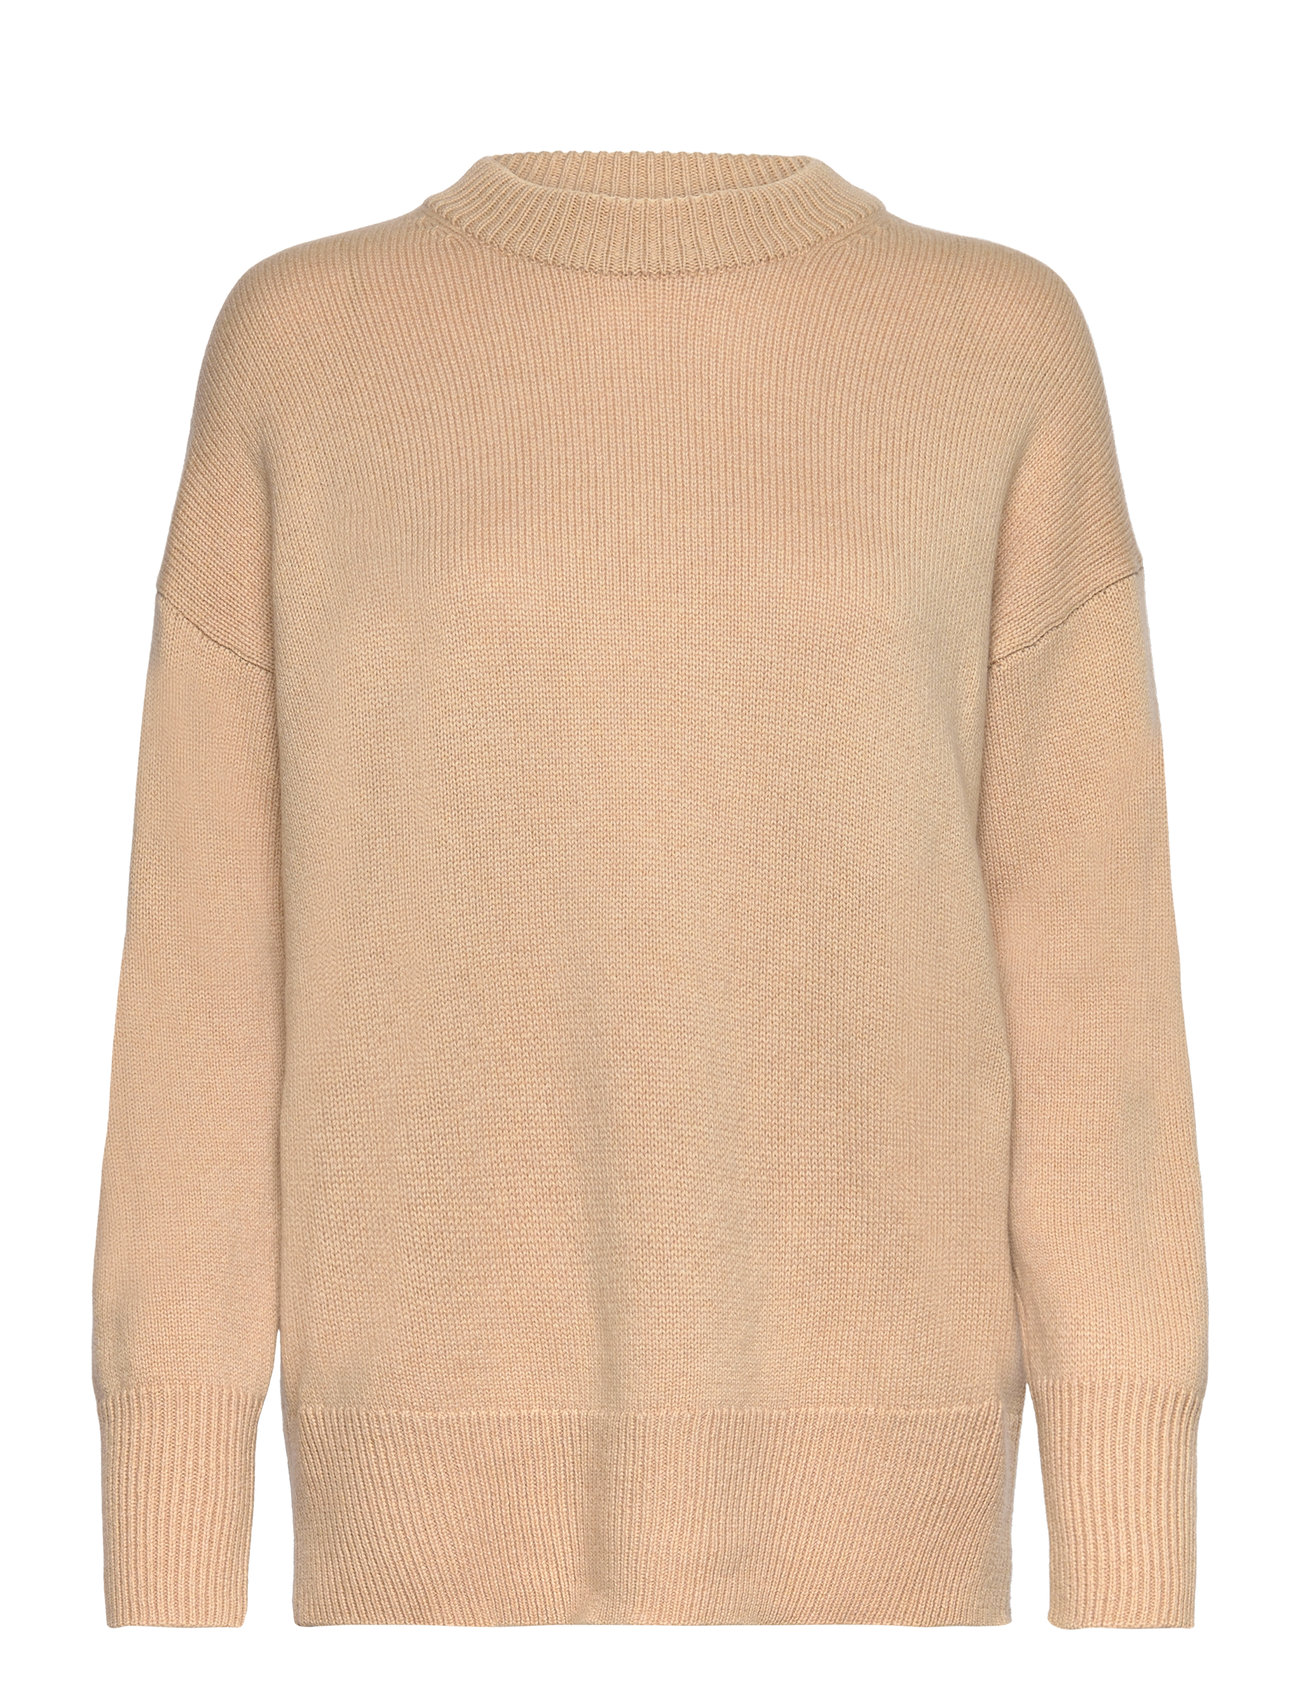 Salome Knit Tops Knitwear Jumpers Beige Andiata